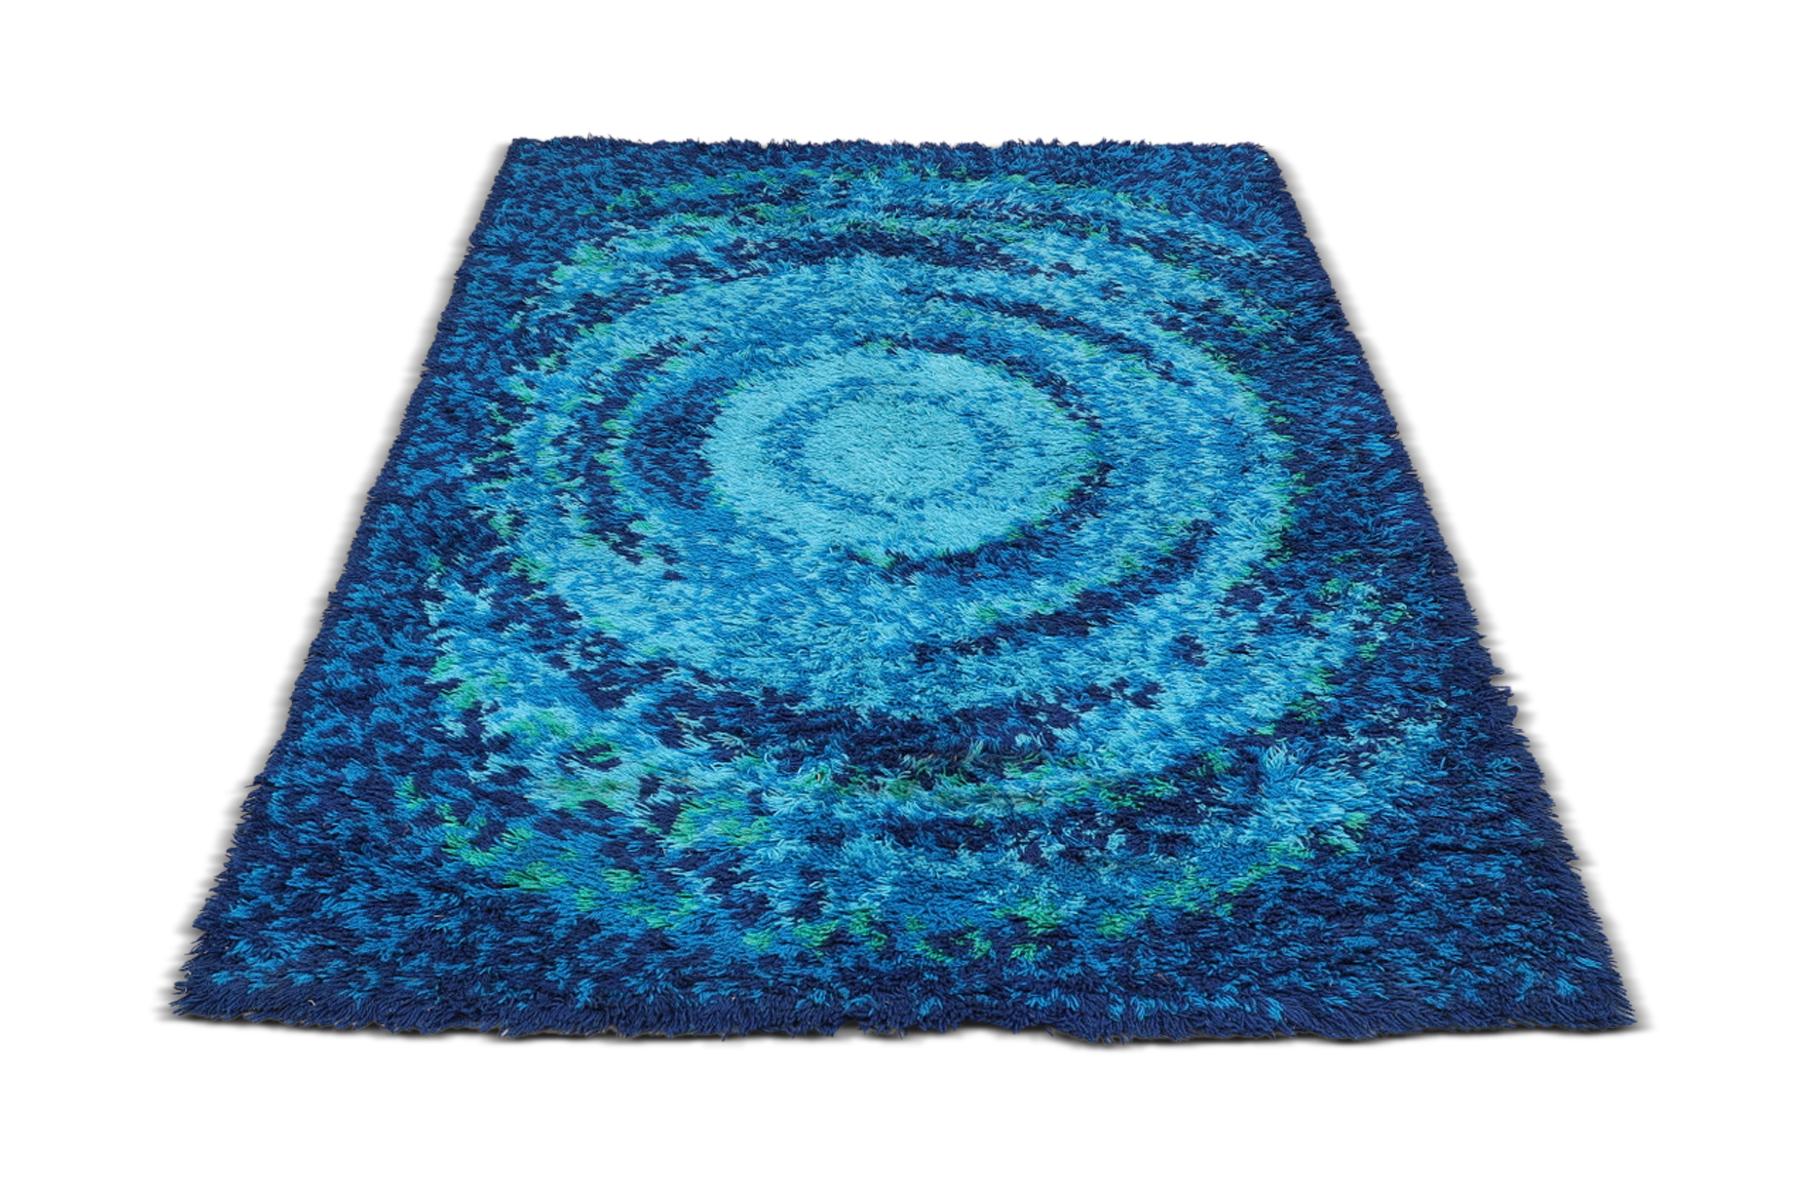 Wool Large Blue High Pile Rya Rug by Strehog Norden For Sale